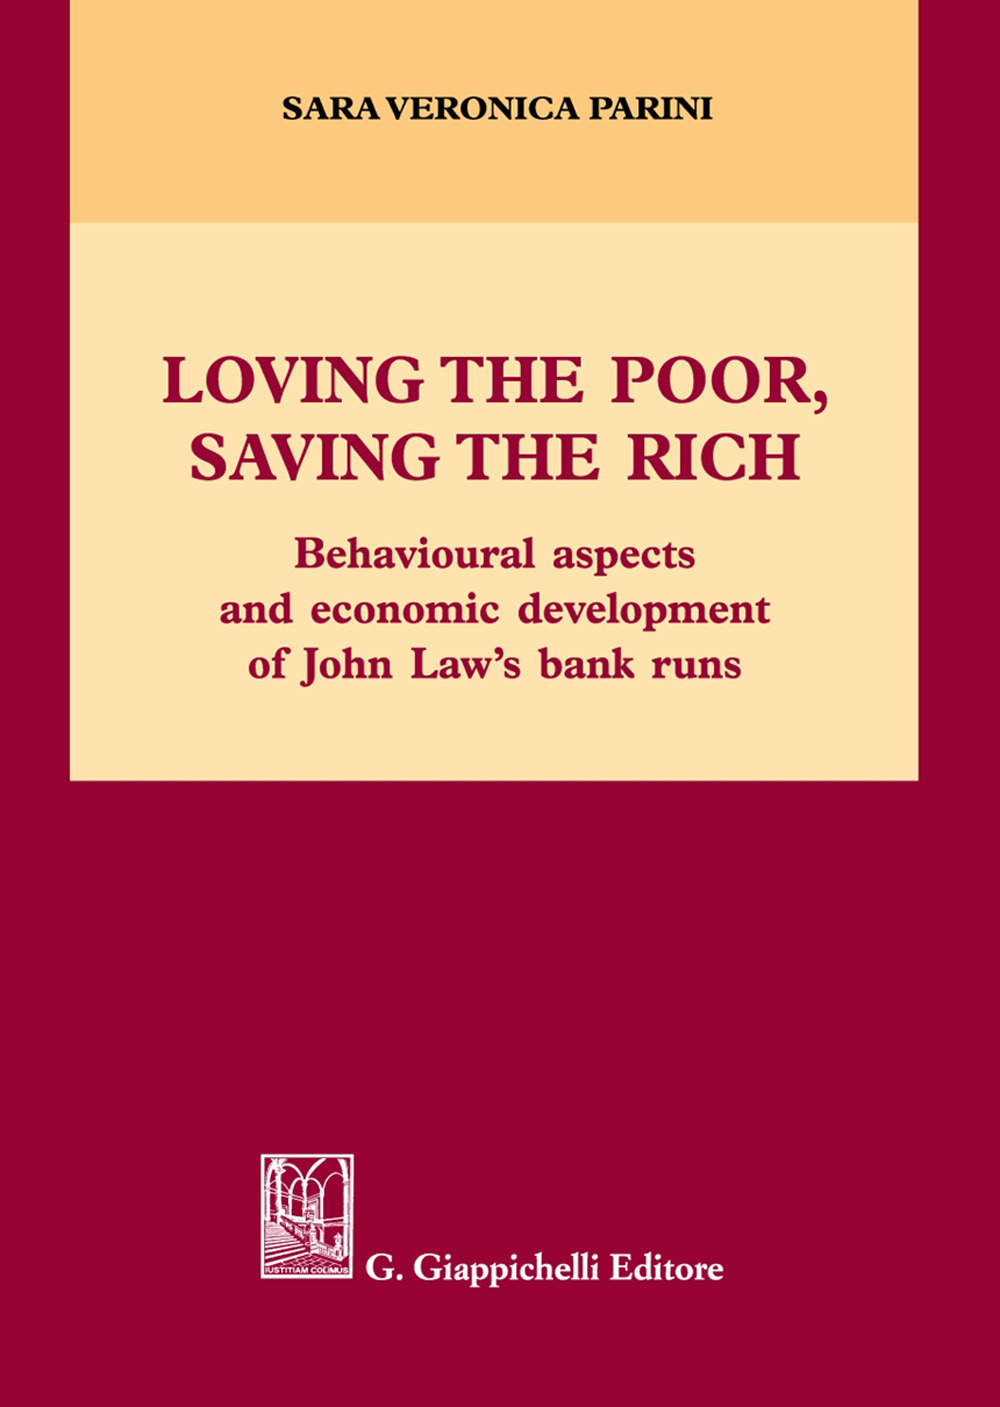 Loving the poor, saving the rich. Behavioural aspects and economic development of Jonh Law's bank runs